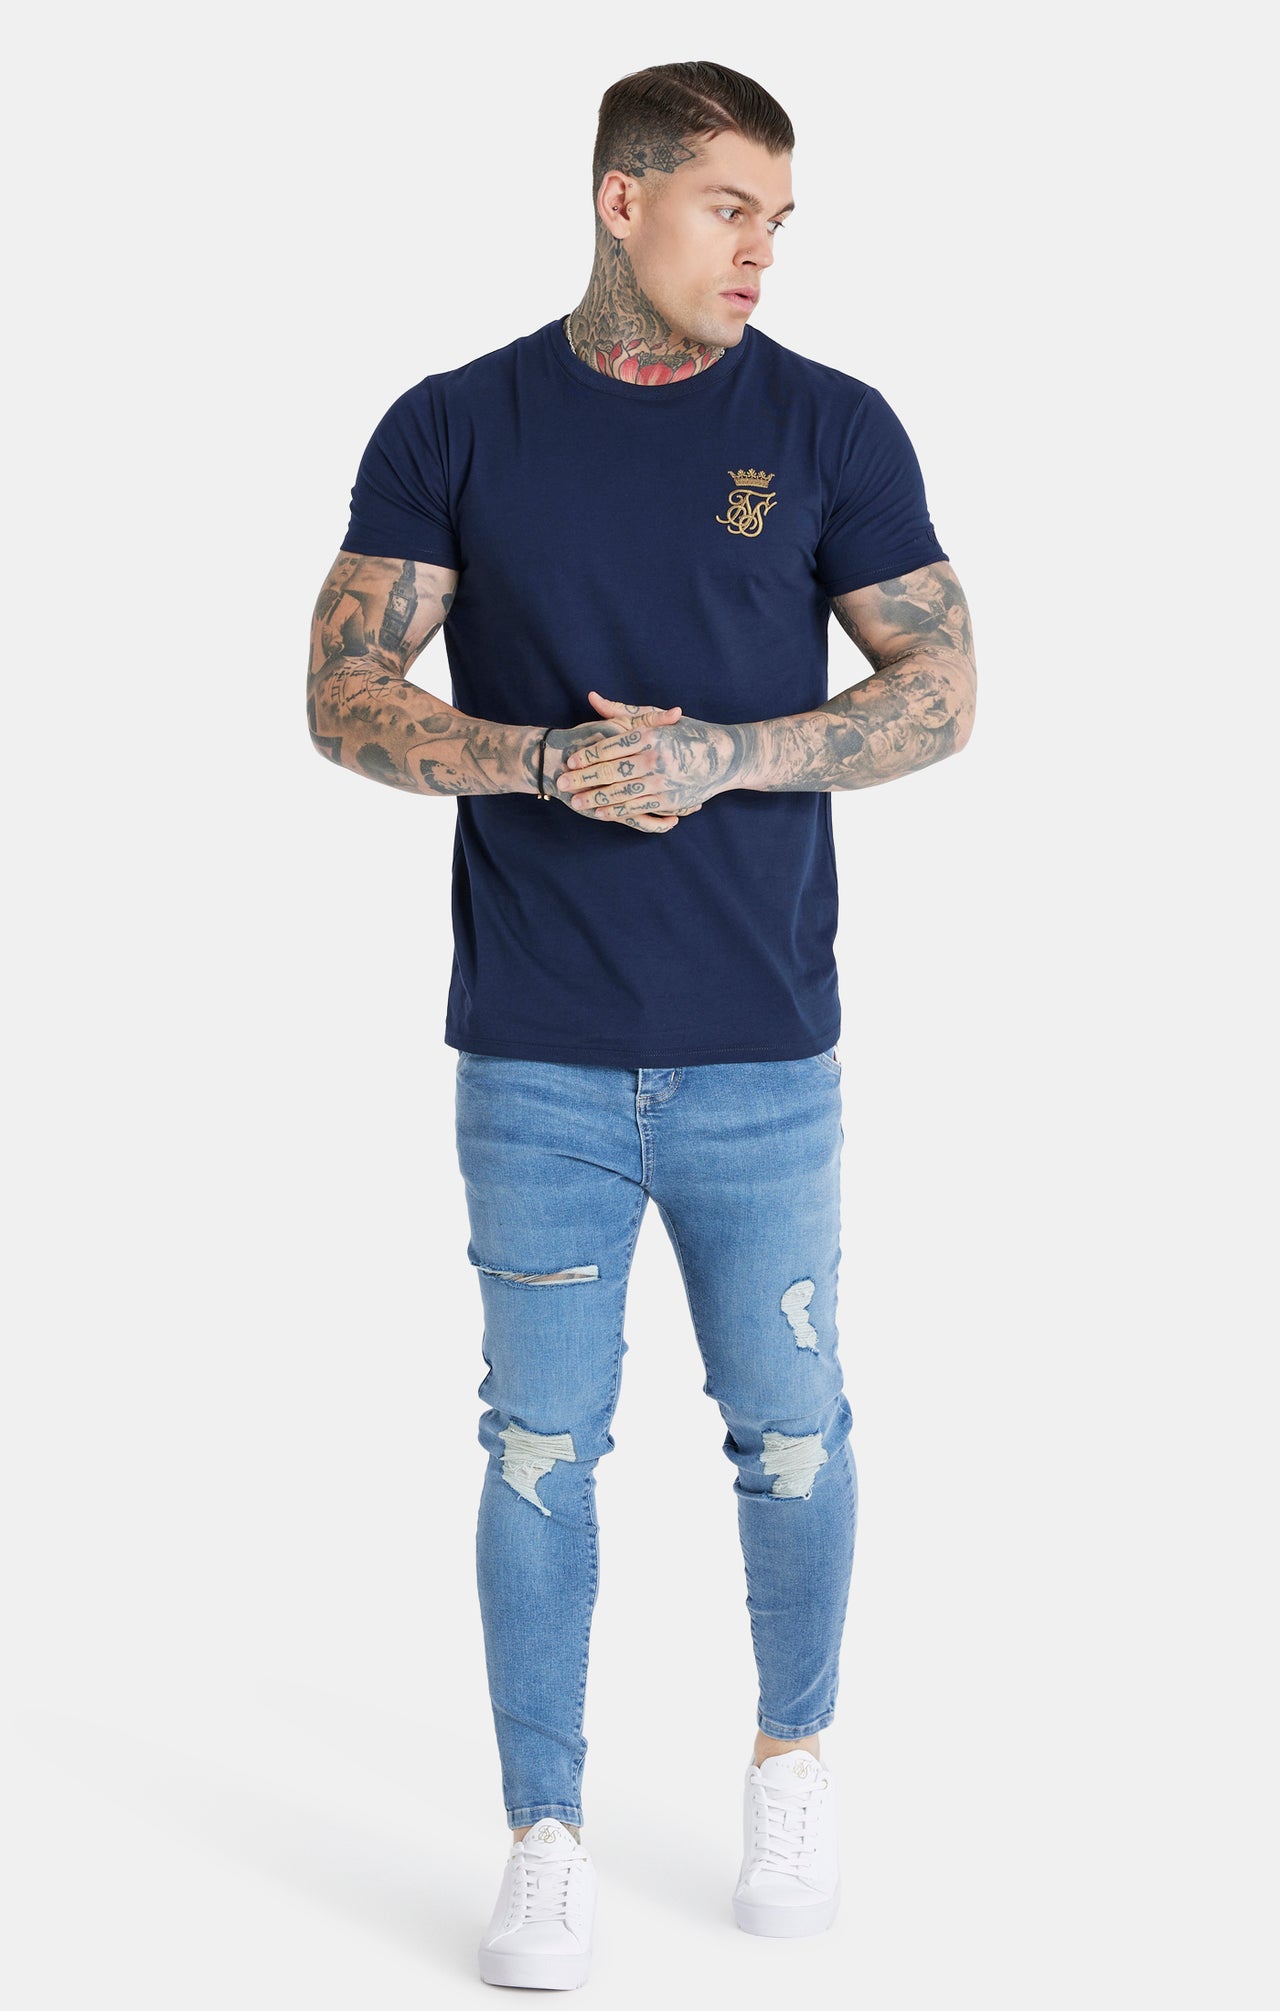 Messi x SikSilk Navy Muscle Fit (1)